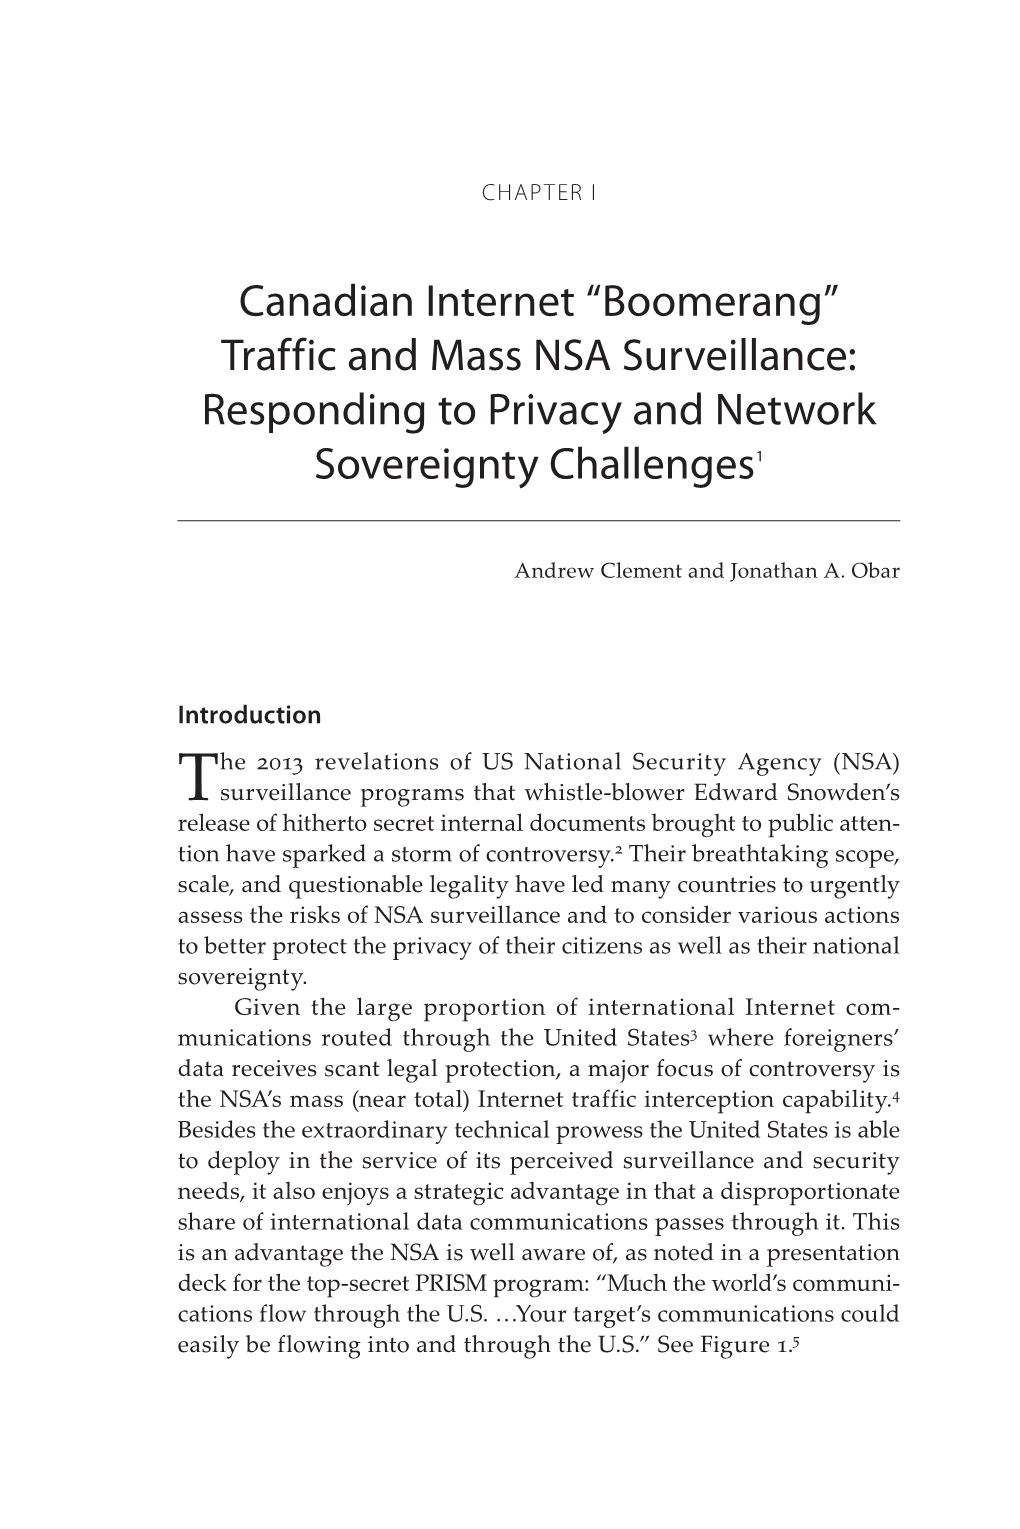 Canadian Internet “Boomerang” Traffic and Mass NSA Surveillance: Responding to Privacy and Network Sovereignty Challenges1